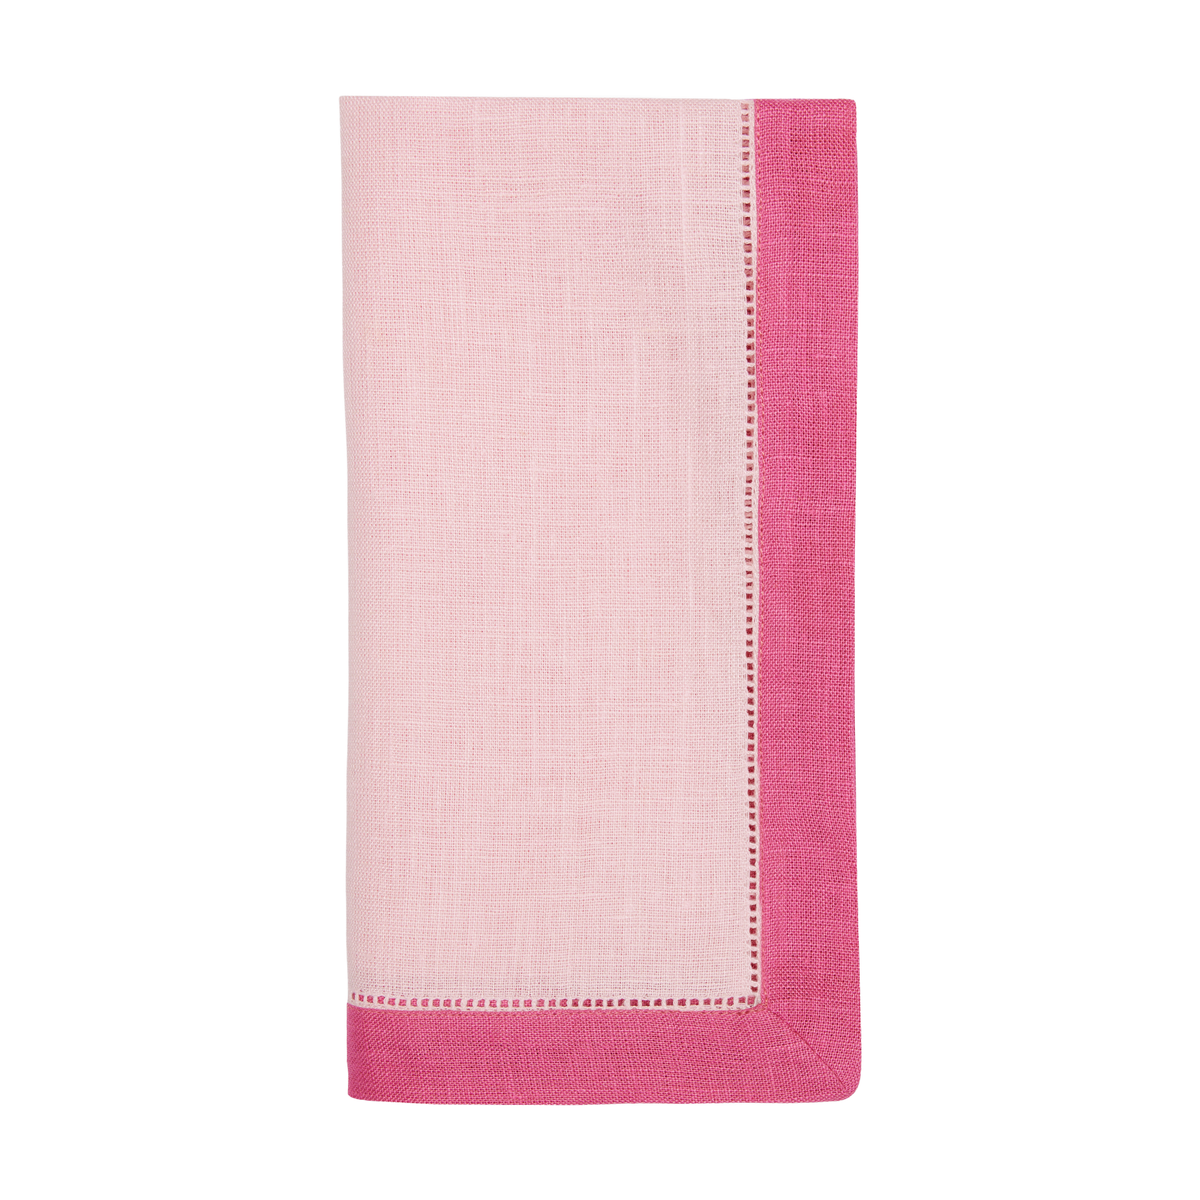 Sferra Roma Table Linens Pink and Carnation Color